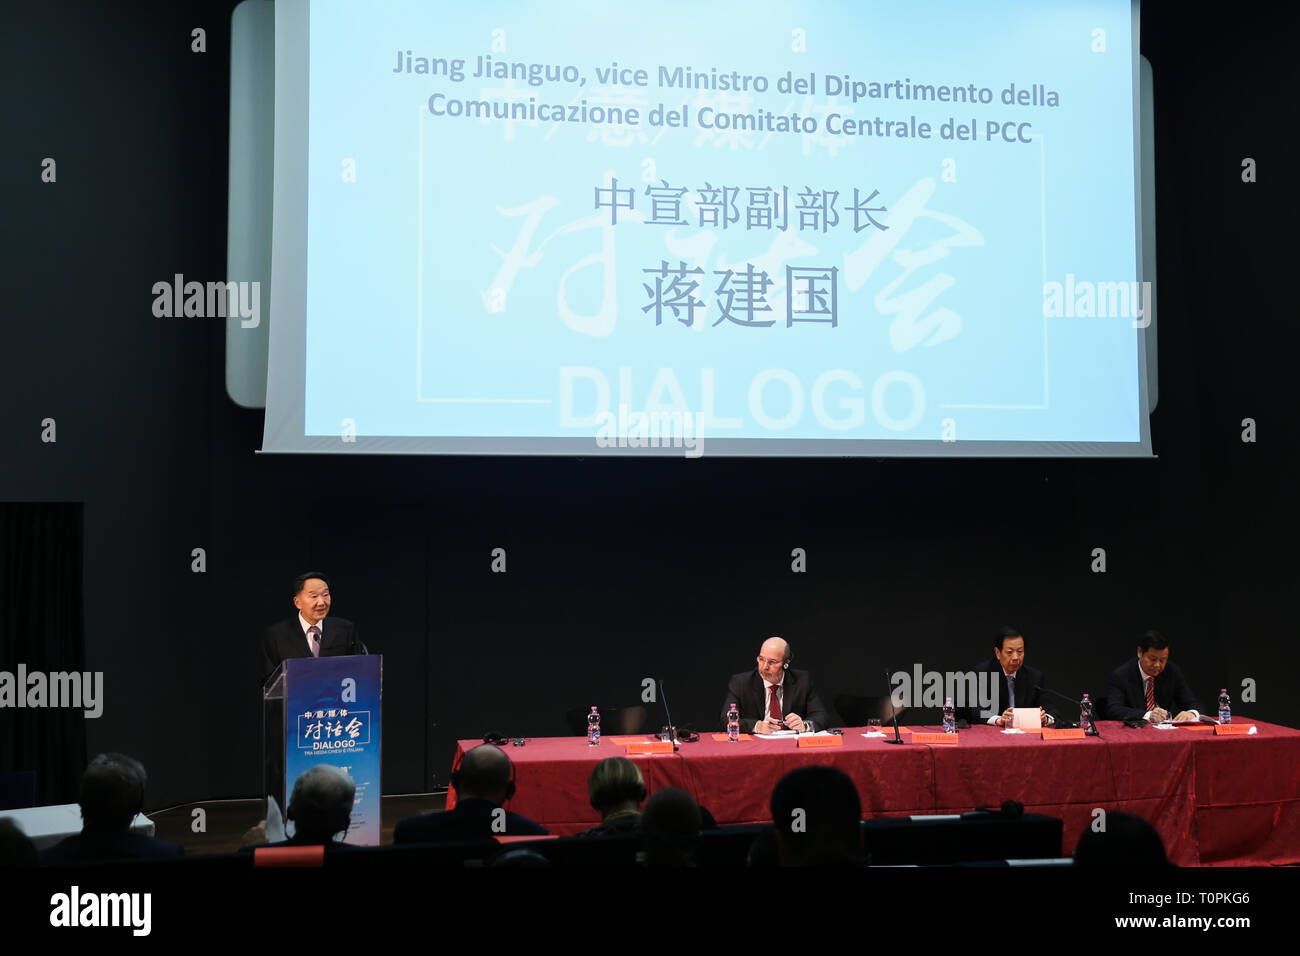 (190322) -- ROME, March 22, 2019 (Xinhua) -- Jiang Jianguo (L), deputy head of the Publicity Department of the Communist Party of China Central Committee, delivers a speech at a dialogue in Rome, Italy, March 20, 2019. Representatives of leading Chinese and Italian media pledged on Wednesday here to renew and expand collaboration to facilitate mutual understanding between the peoples and to promote bilateral ties. On the eve of Chinese President Xi Jinping's state visit to Italy, some 200 government officials, media executives, reporters and experts of the two countries participated in a di Stock Photo